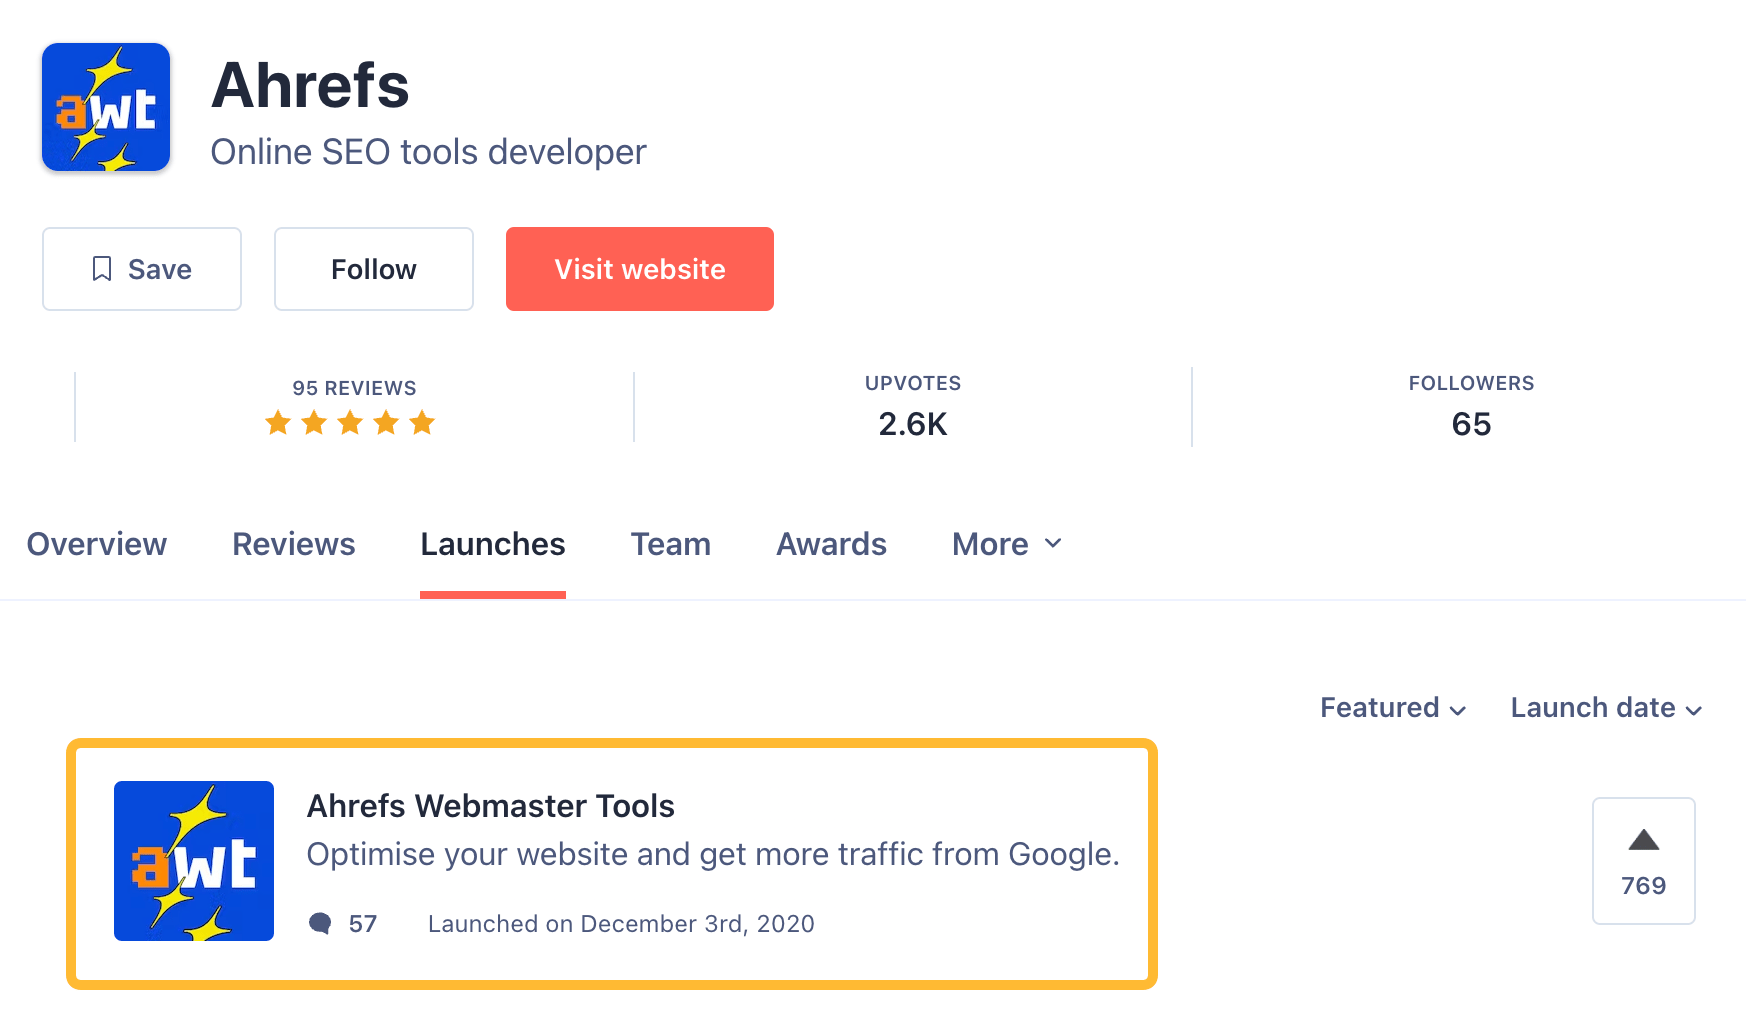 Promoting Ahrefs Webmaster Tools on Product Hunt in 2020
